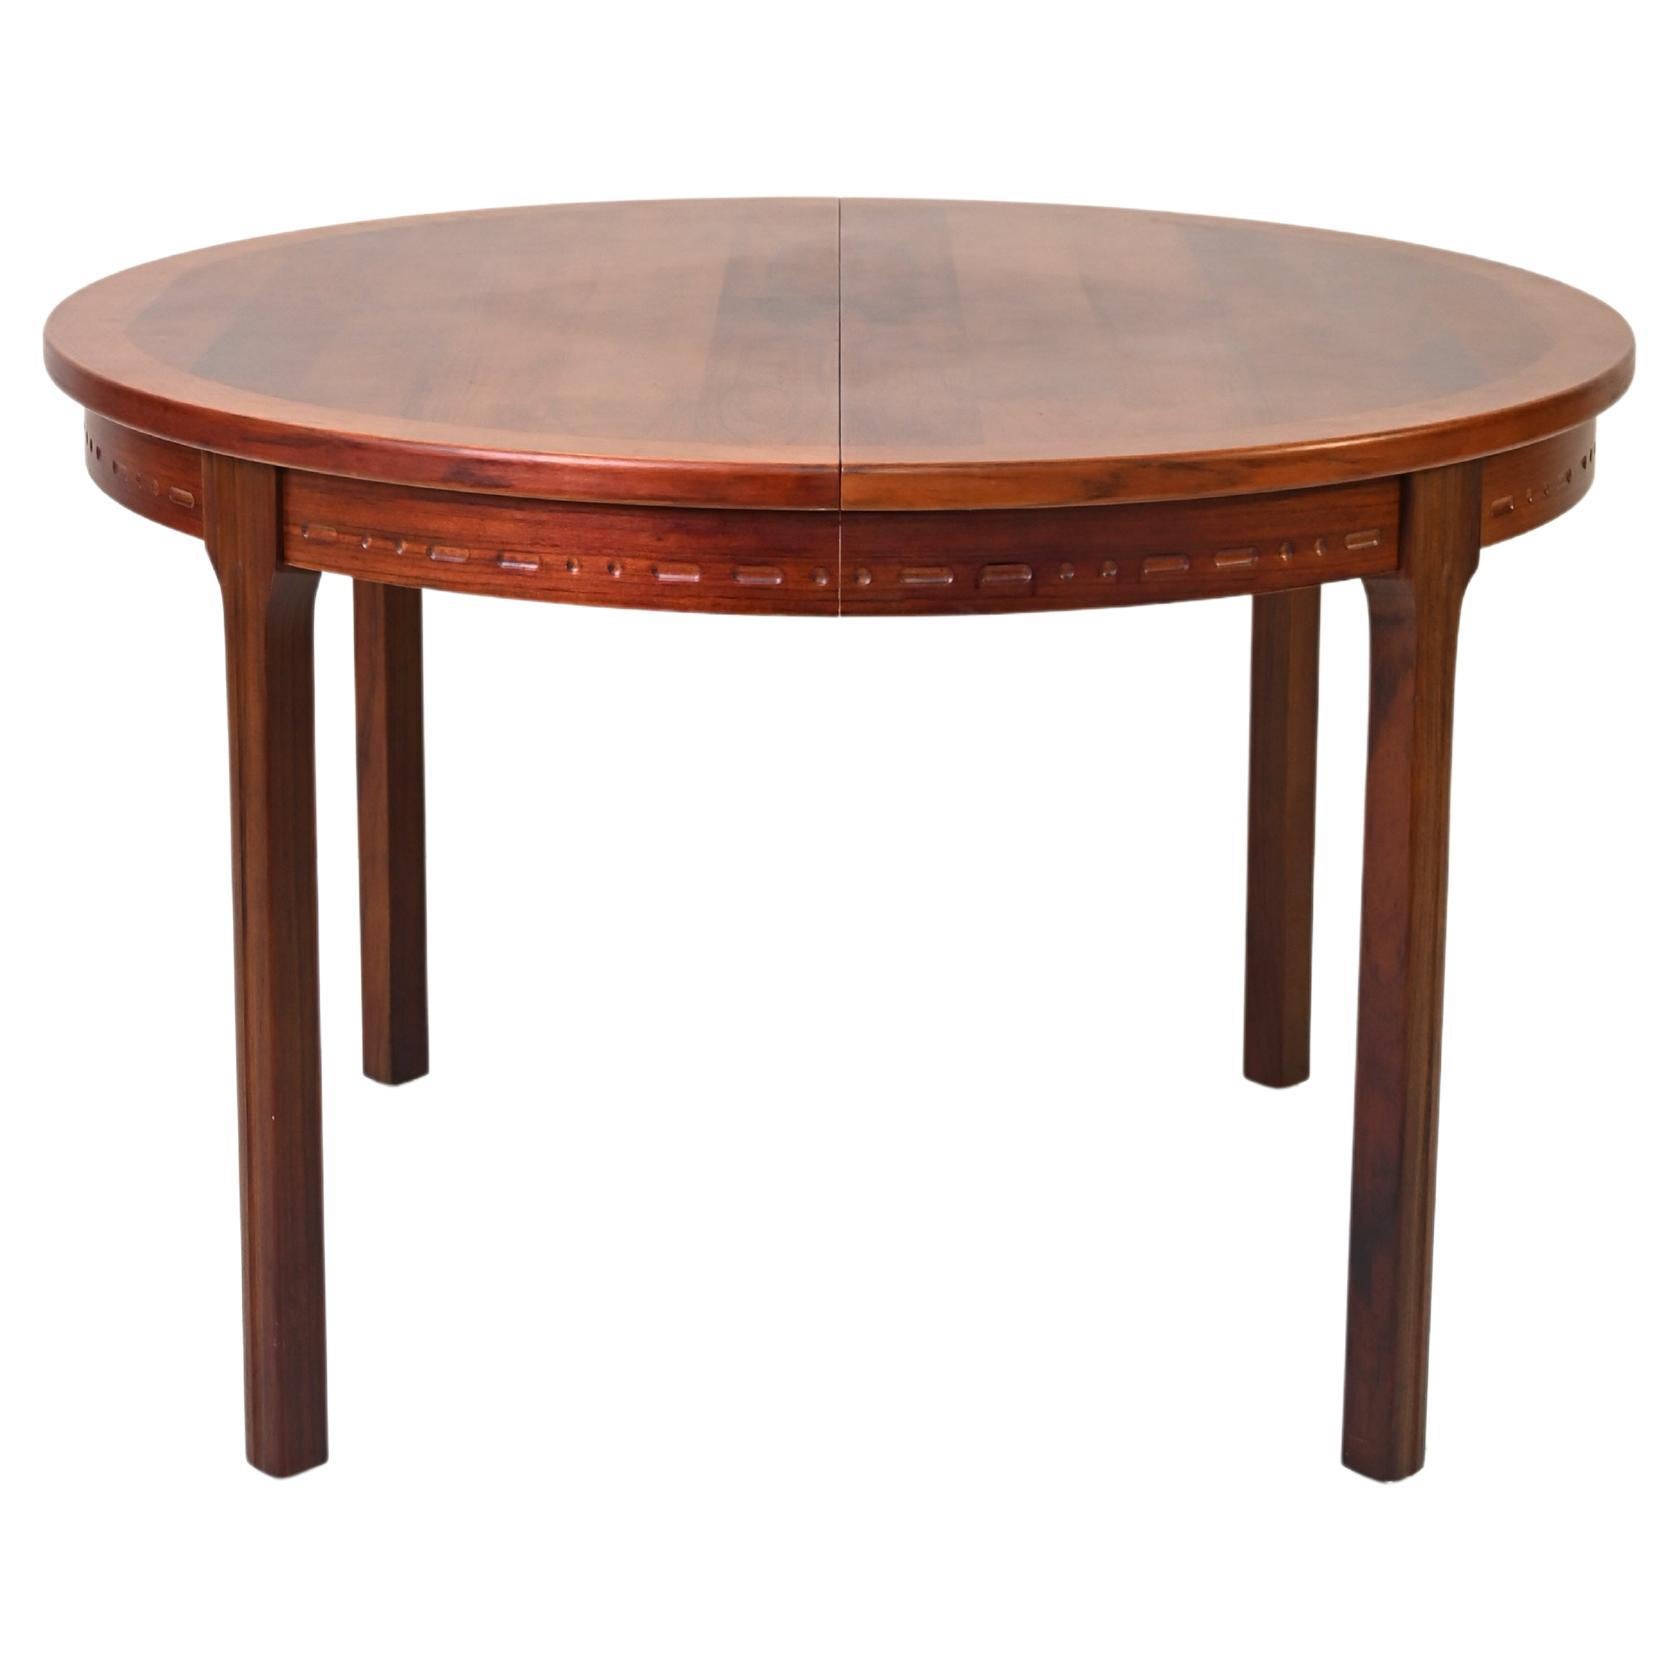 Scandinavian Round Dining Table by Nils Jonsson